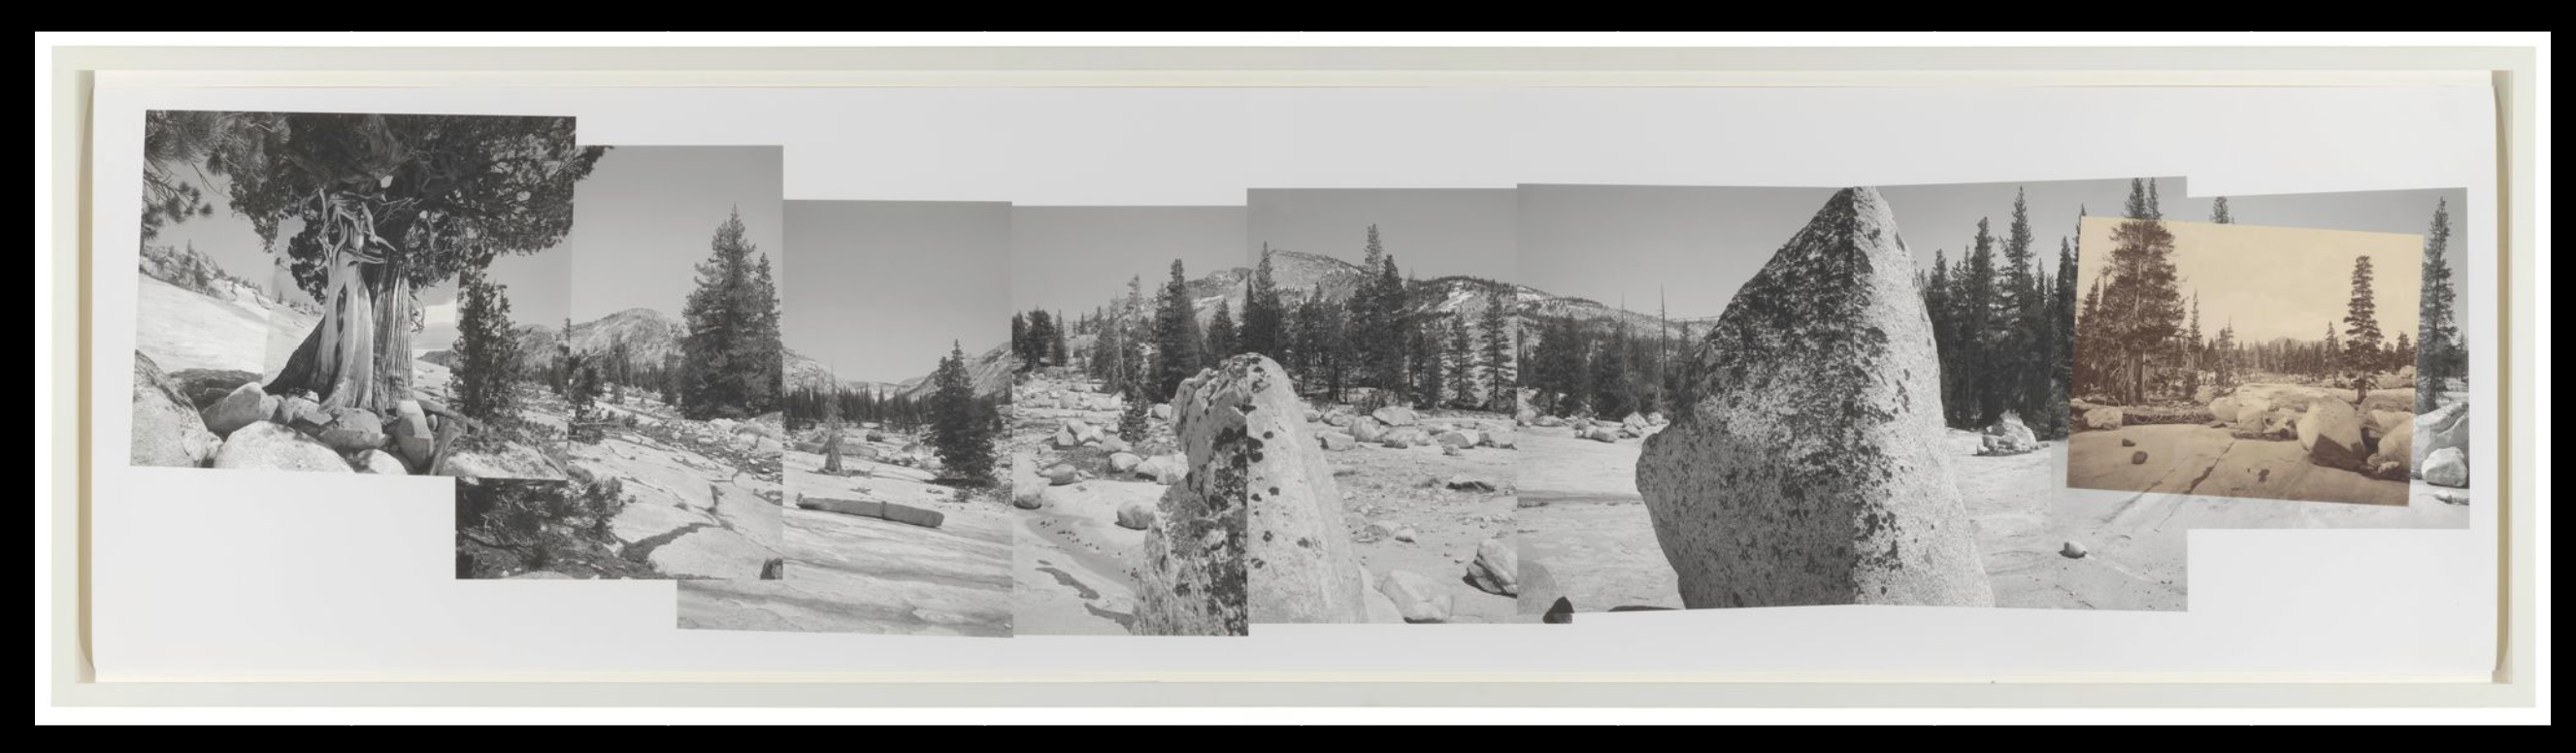 Mark Klett and Byron Wolfe, Above Lake Tenaya, Connecting Views from Edward Weston and Eadweard Muybridge, from the Yosemite Project, 2001. Collection SFMOMA, Purchase through a gift of Mary and Thomas Field; © Mark Klett and Byron Wolfe.